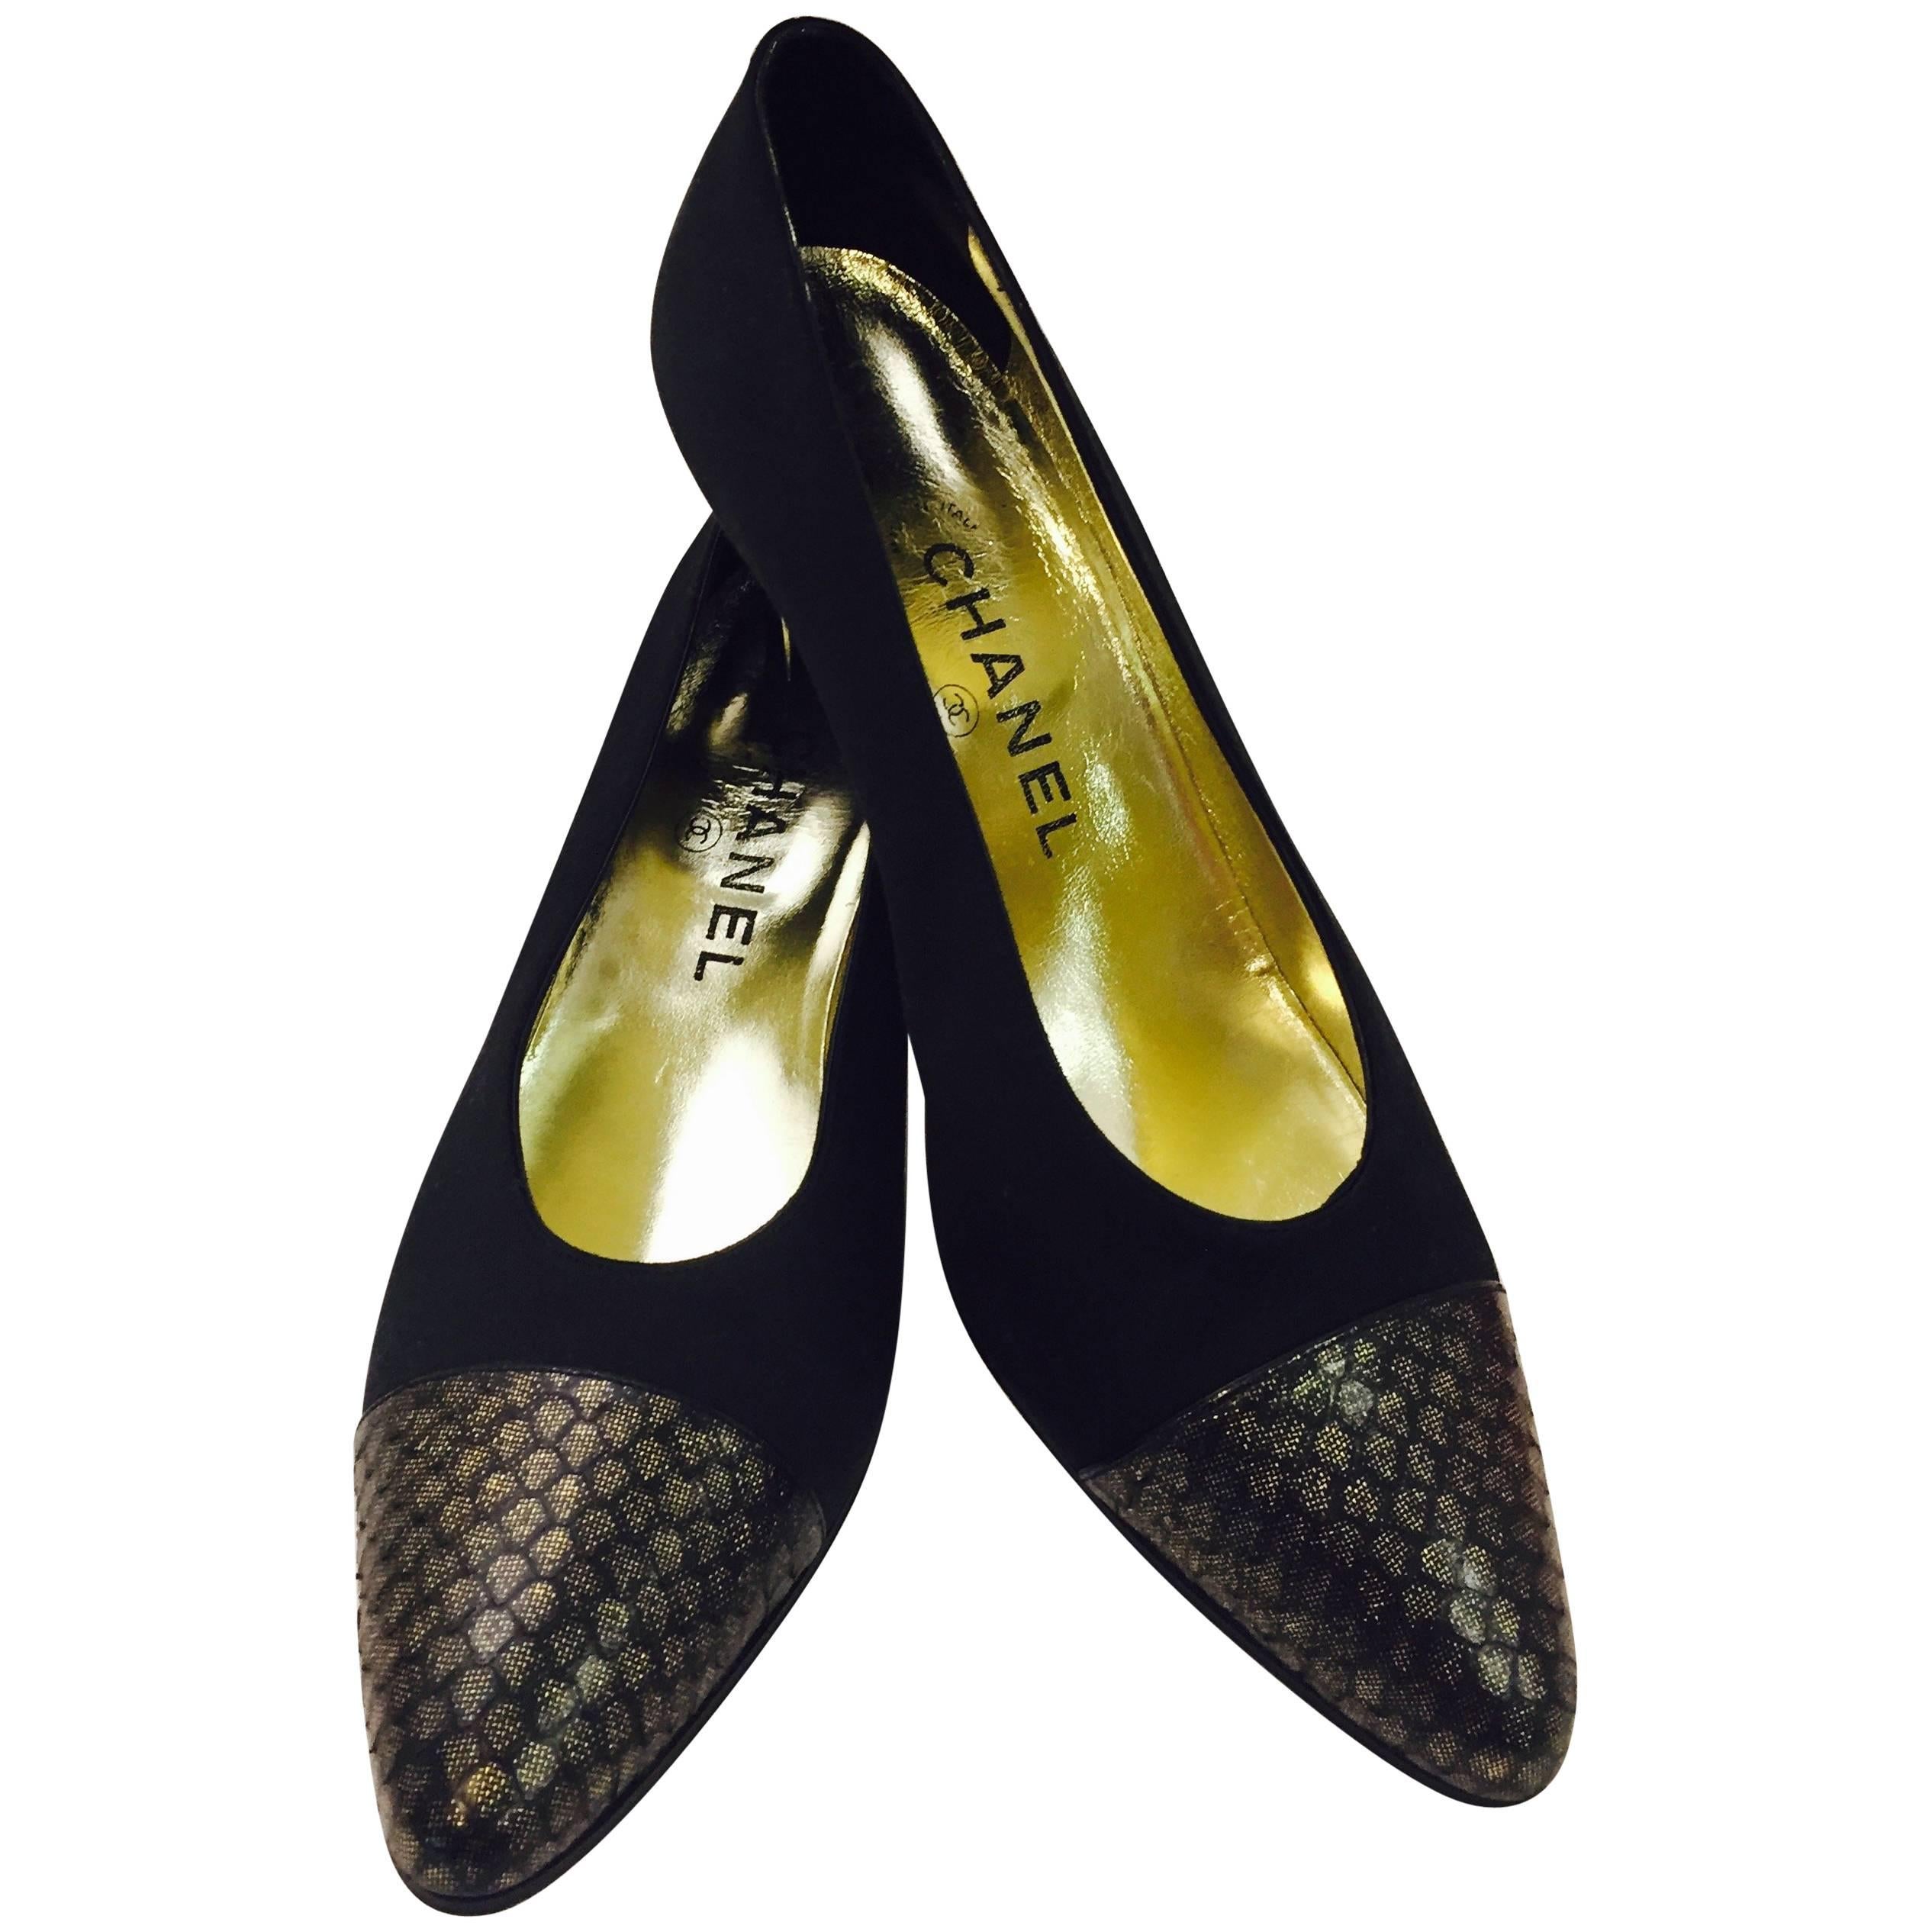 Charismatic Chanel's Black Satin Pumps With Cap Toe in Gold and Black